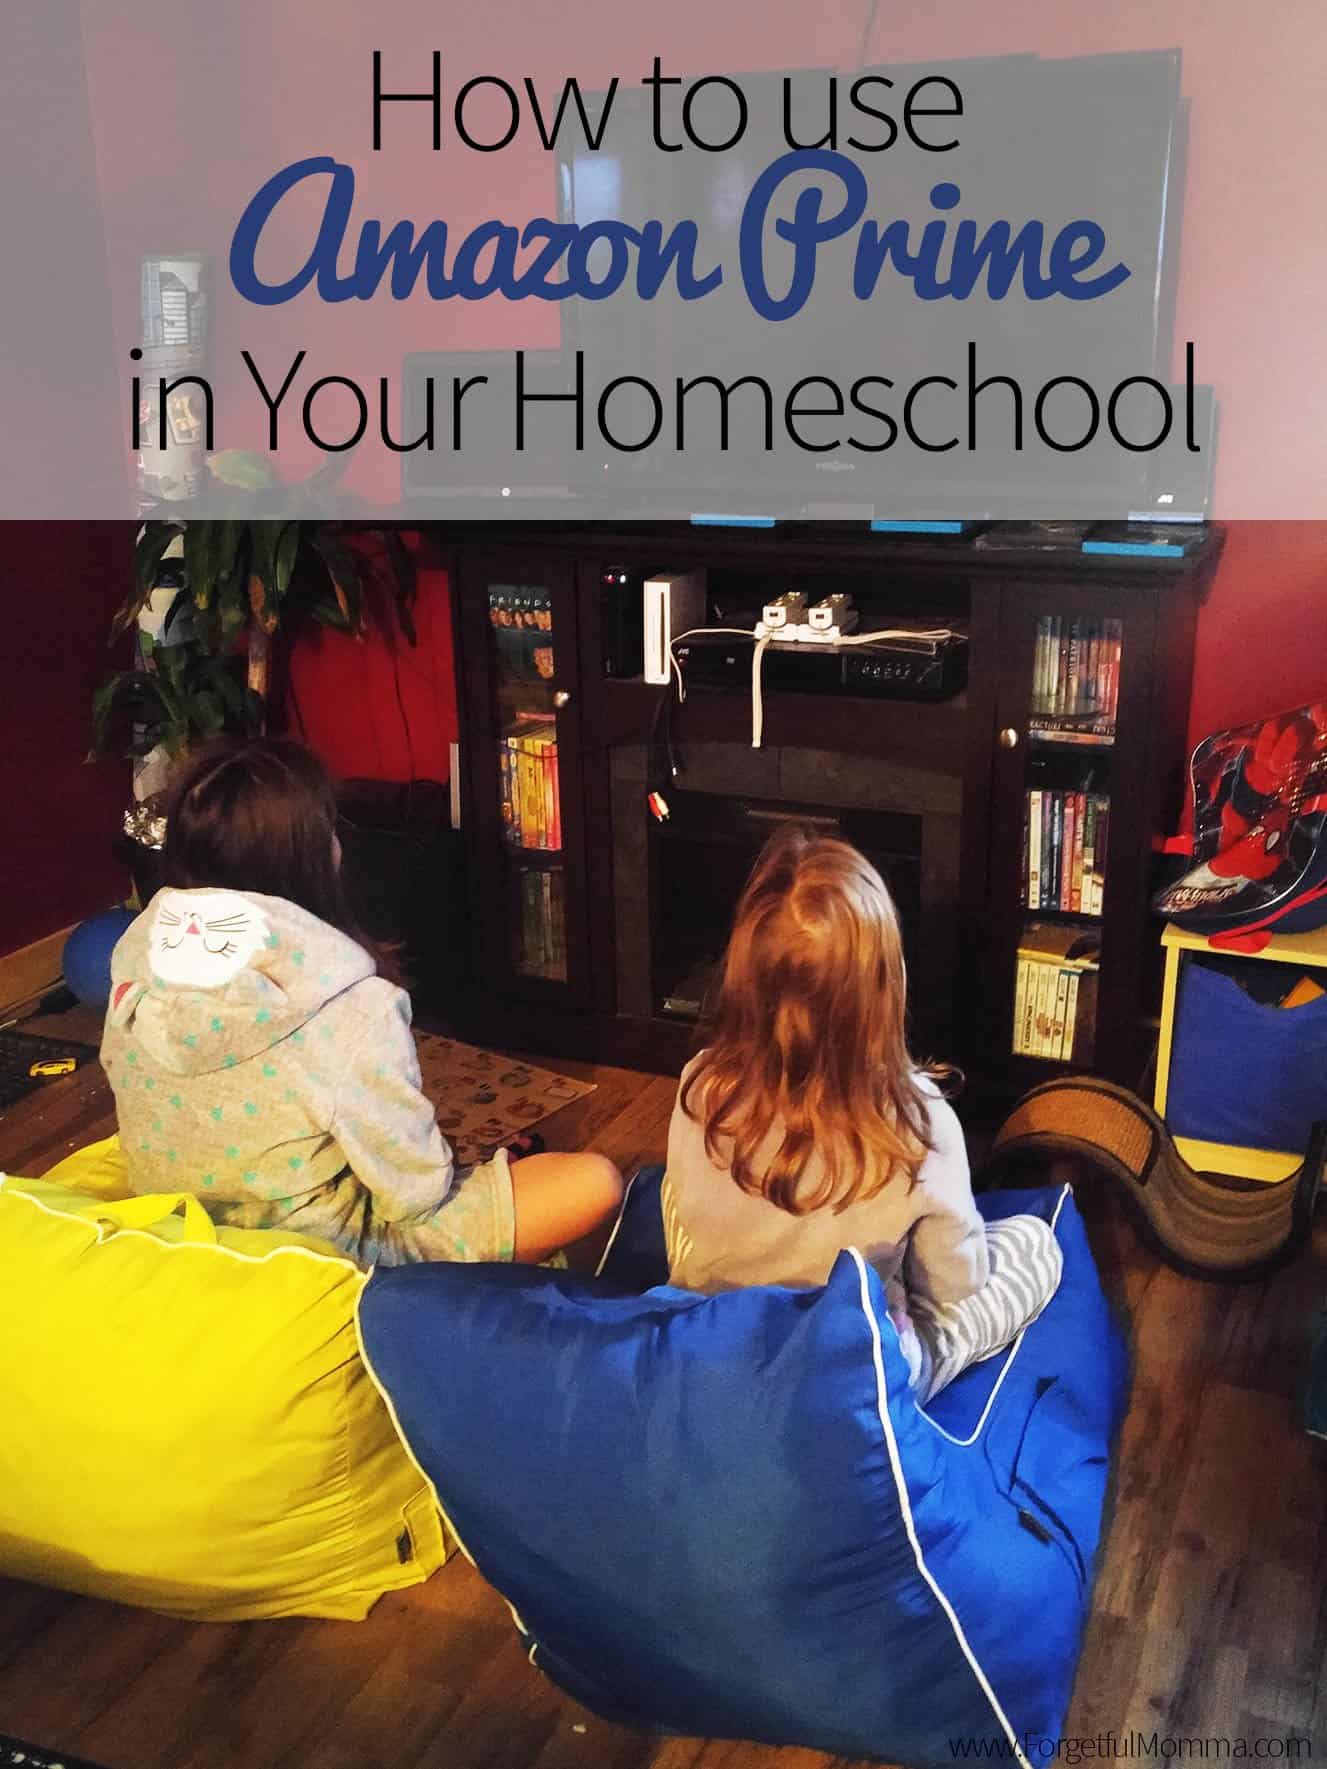 How To Use Amazon Prime in Your Homeschool